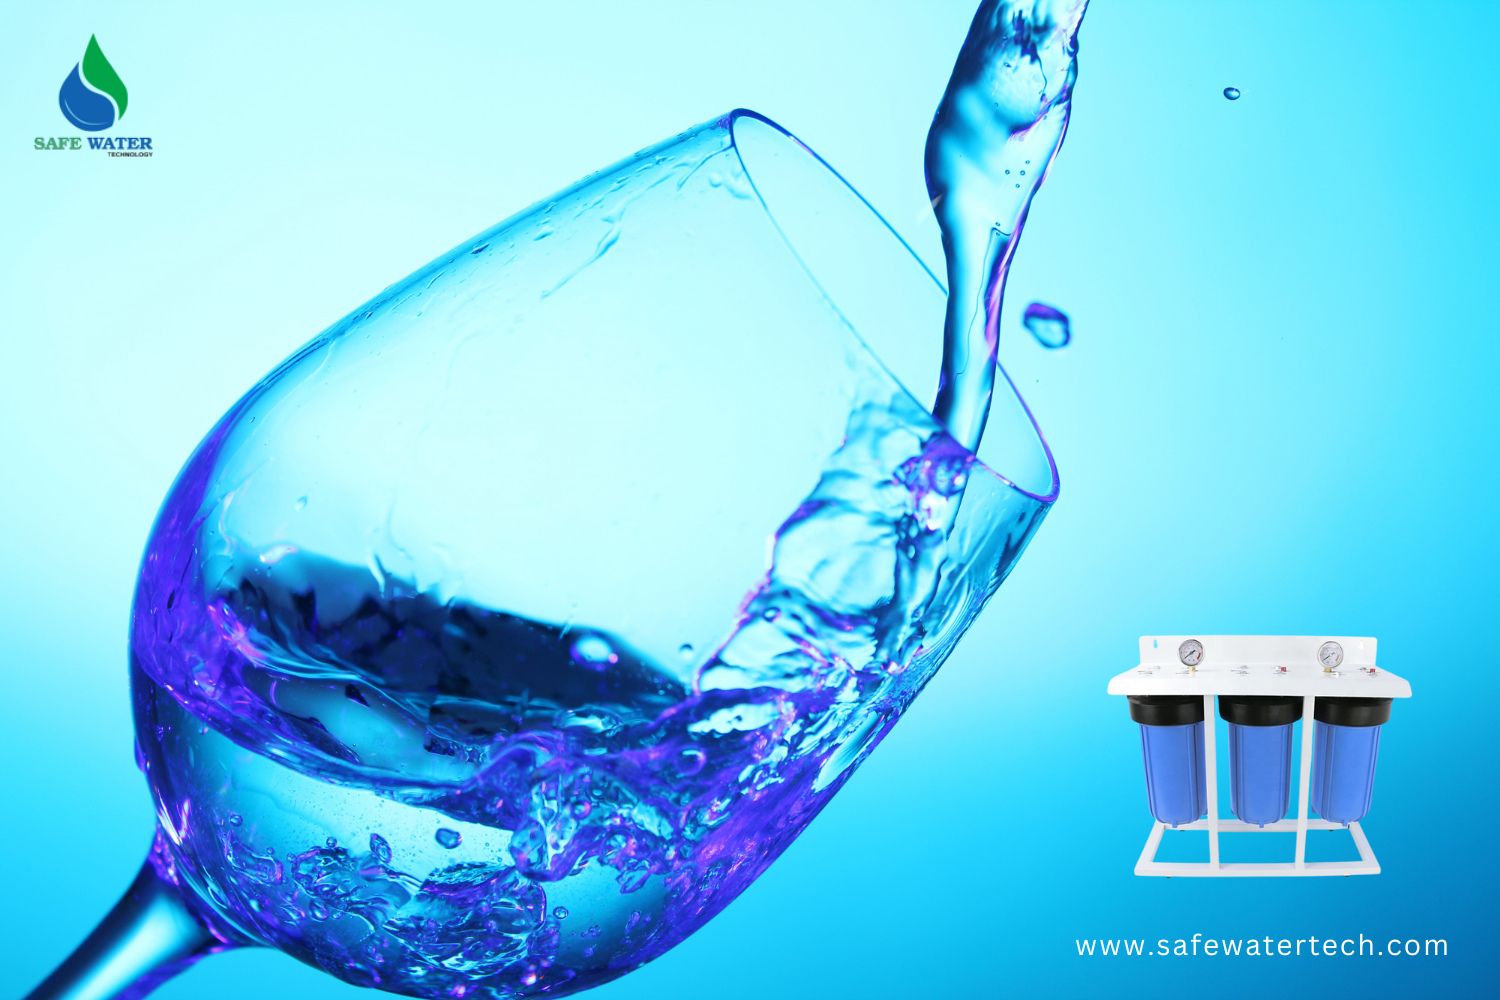 role of water filter in healthy life